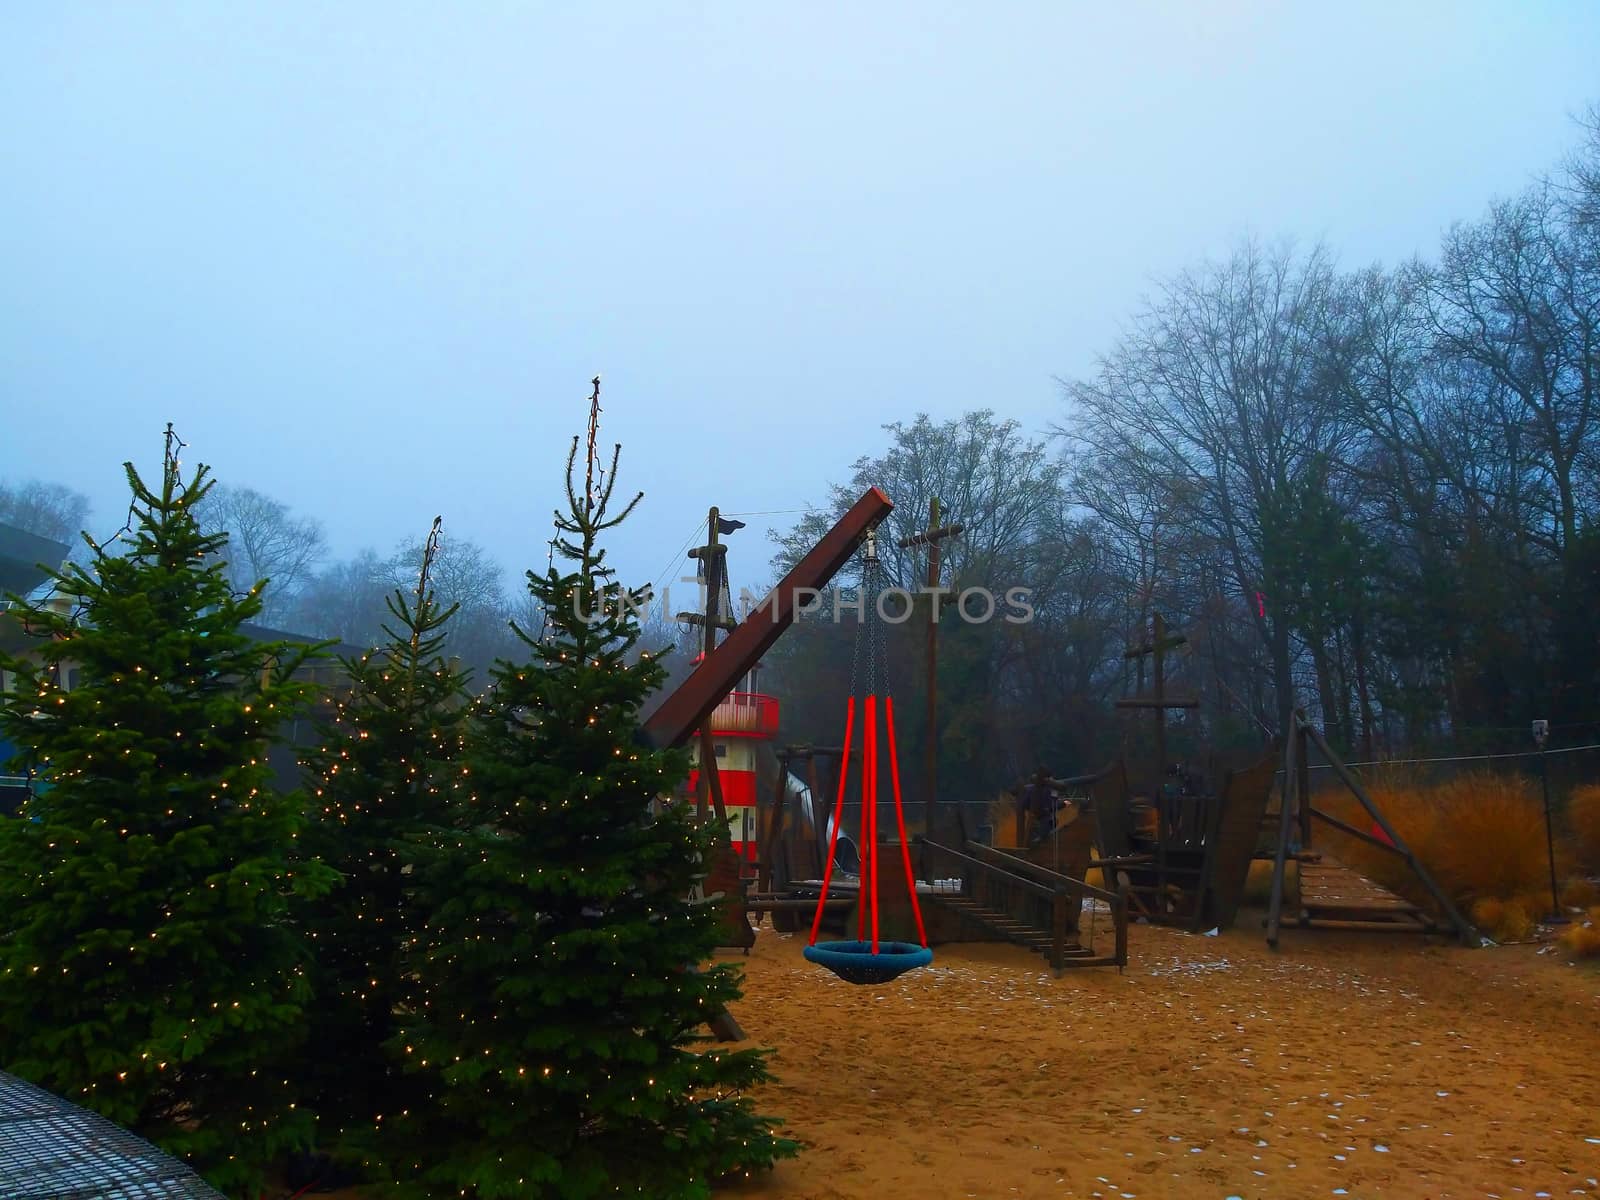 Christmas trees in a lumberyard by gswagh71